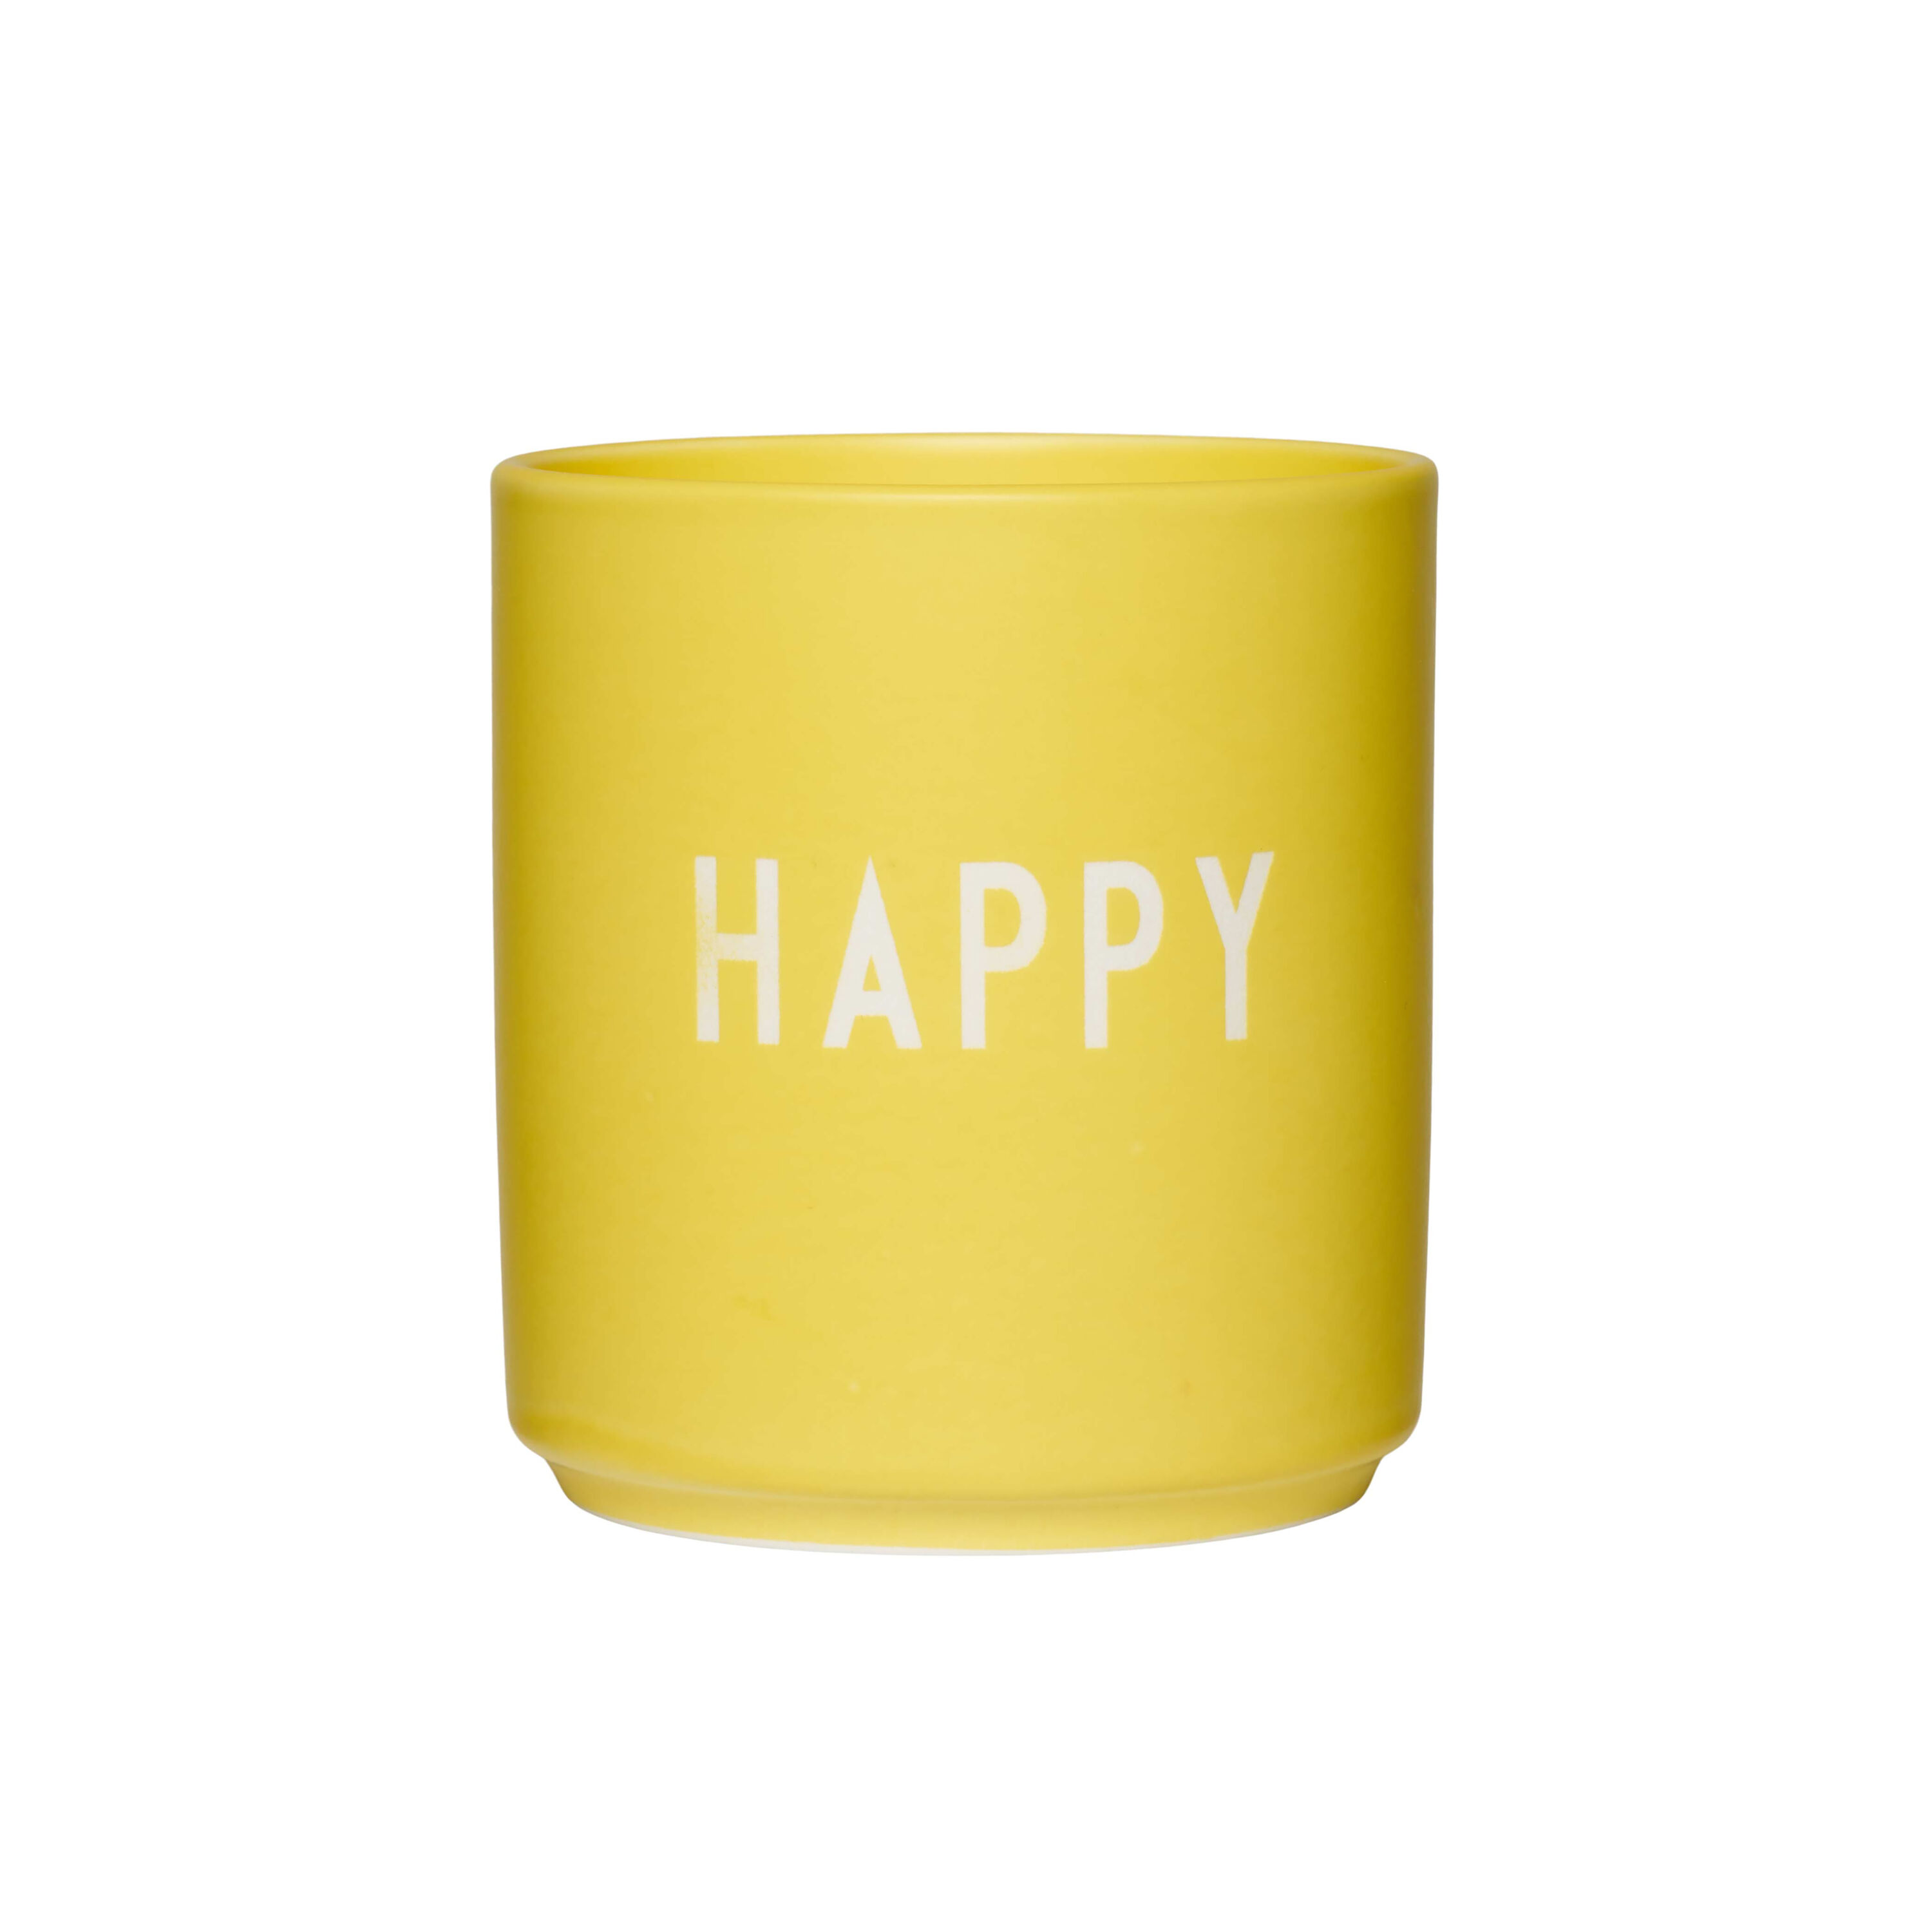 Favourite Cup "HAPPY" (gelb)